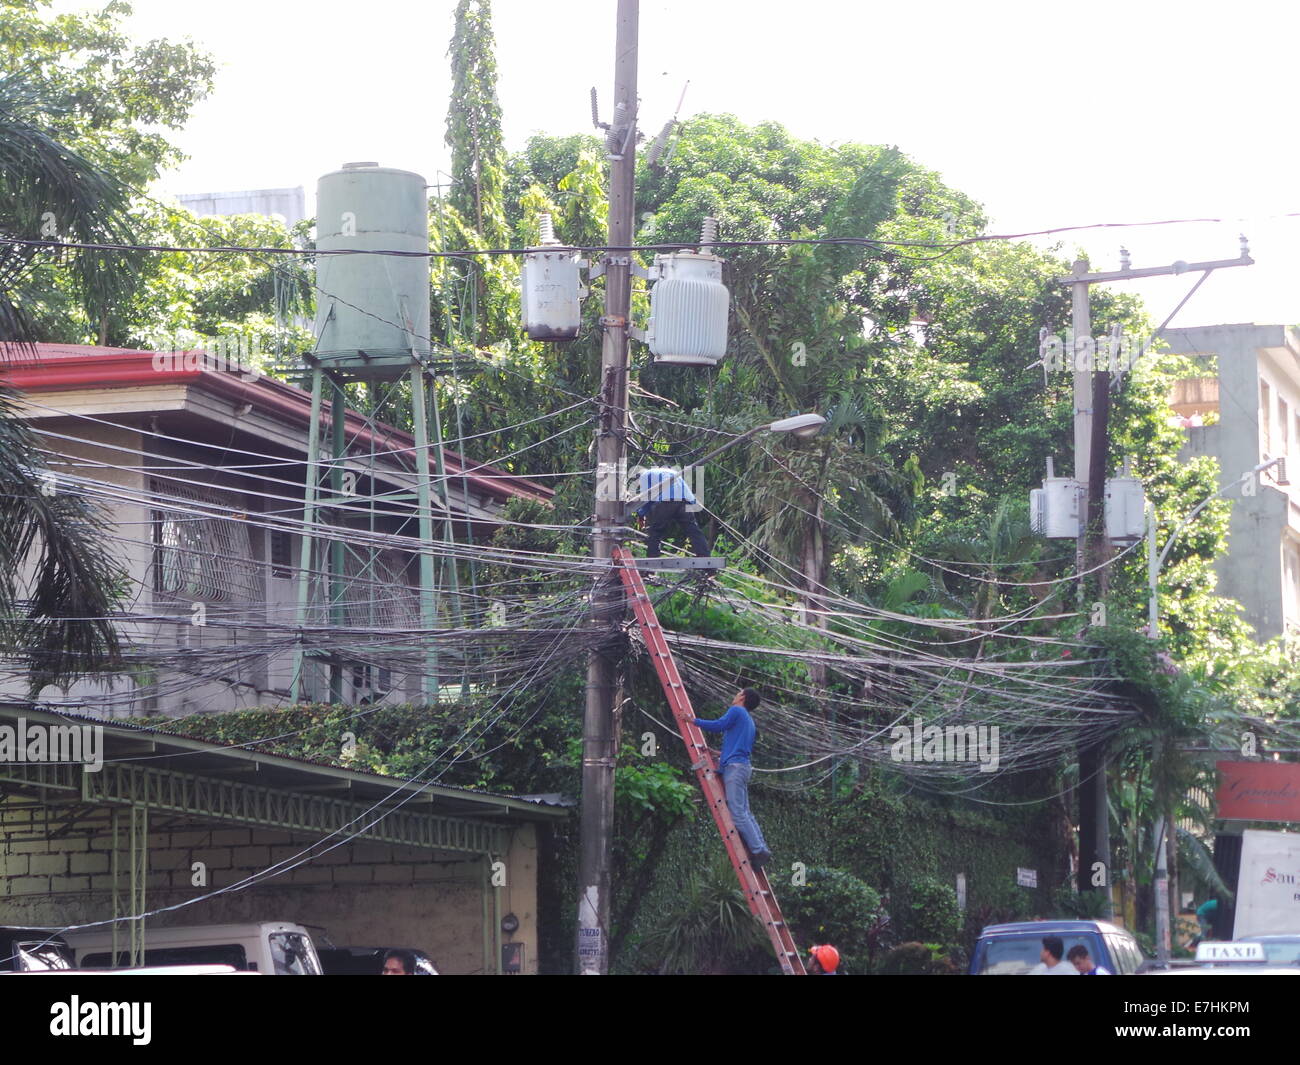 Manila, Philippines. 18 September, 2014. Men from electric company fixing electric cables.  Luzon and Visayas Islands of the Philippines will be experiencing energy crisis on the summer of 2015 according to Energy Secretary Jericho Petilla. Once President Aquino acquires emergency powers from the Congress, Filipino consumers will endure additional increase of 20 centavo per kilowatt hour. The Philippines has the highest electricity cost in Asia-Pacific region. © Sherbien Dacalanio / Alamy Live News Stock Photo